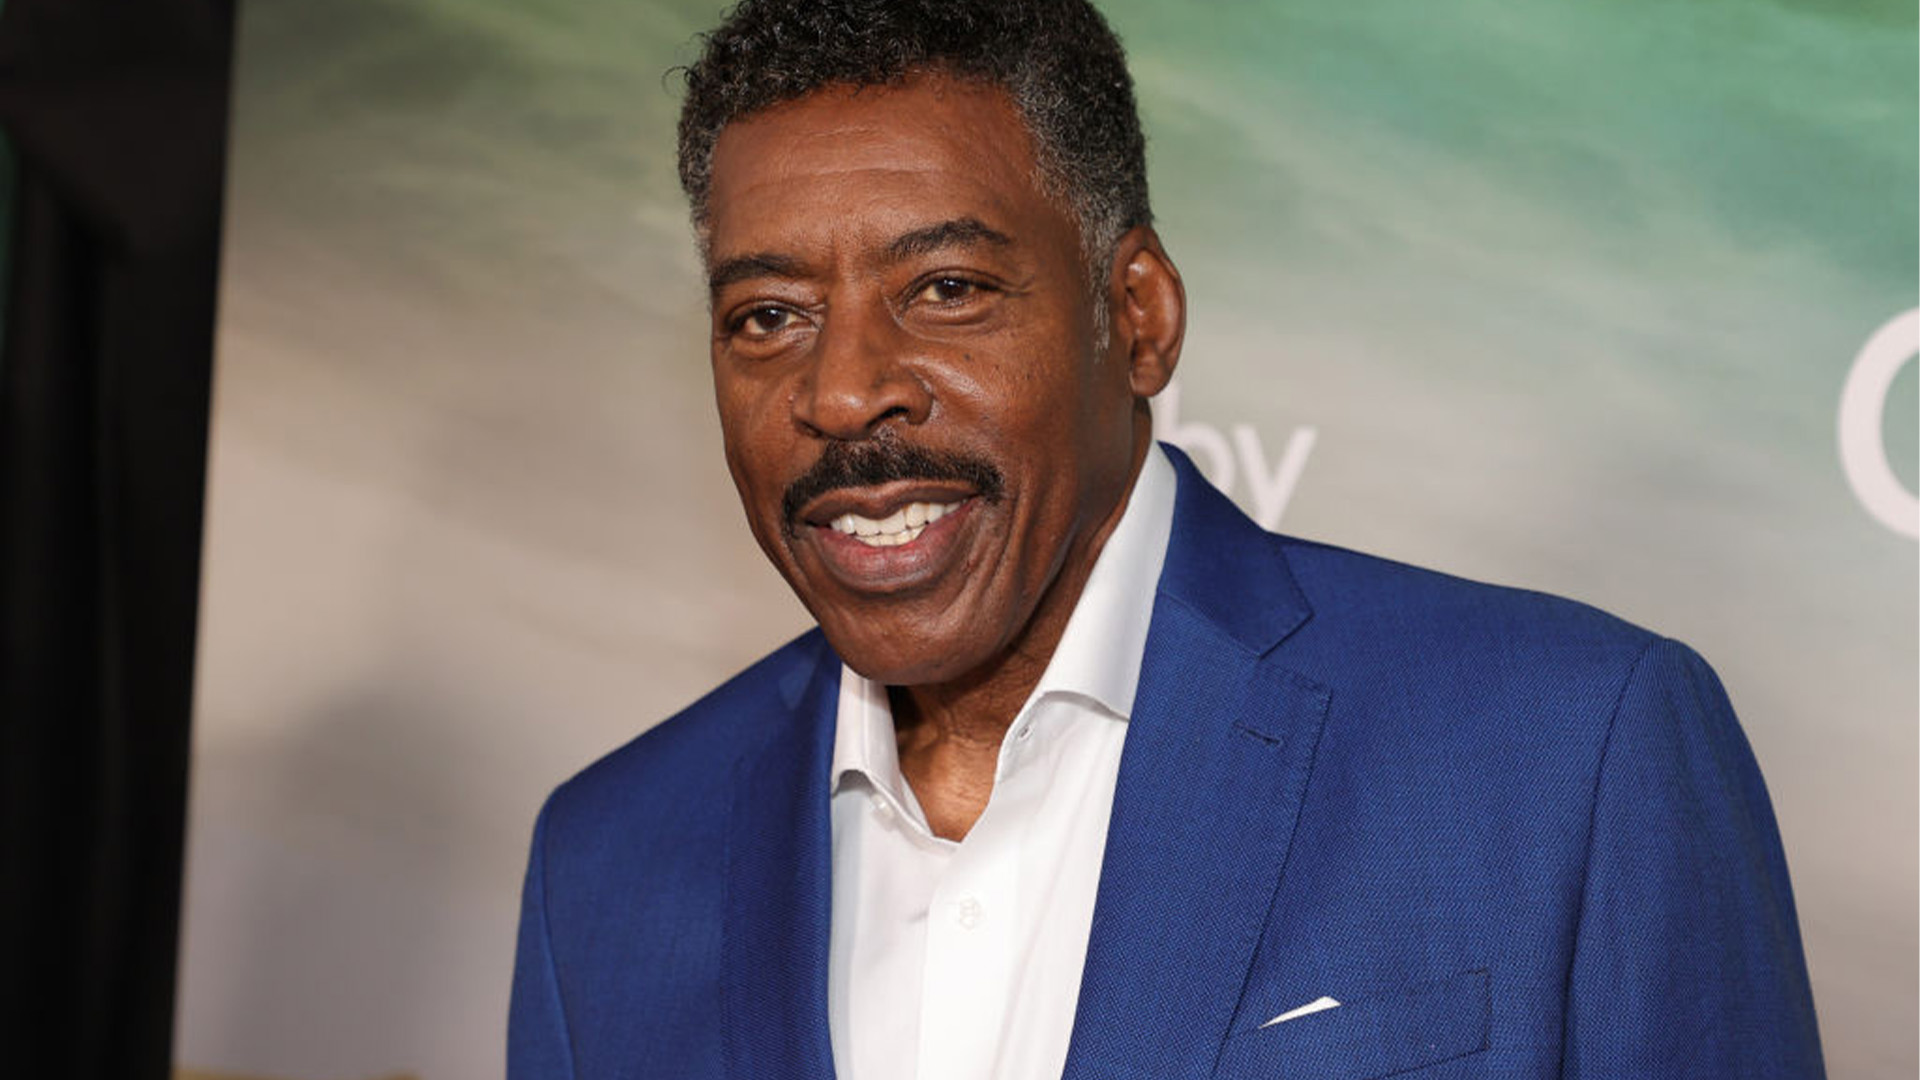 'Ghostbusters' Actor Ernie Hudson Says He Only Pocketed $370 From His First ‘Big’ Hollywood Paycheck